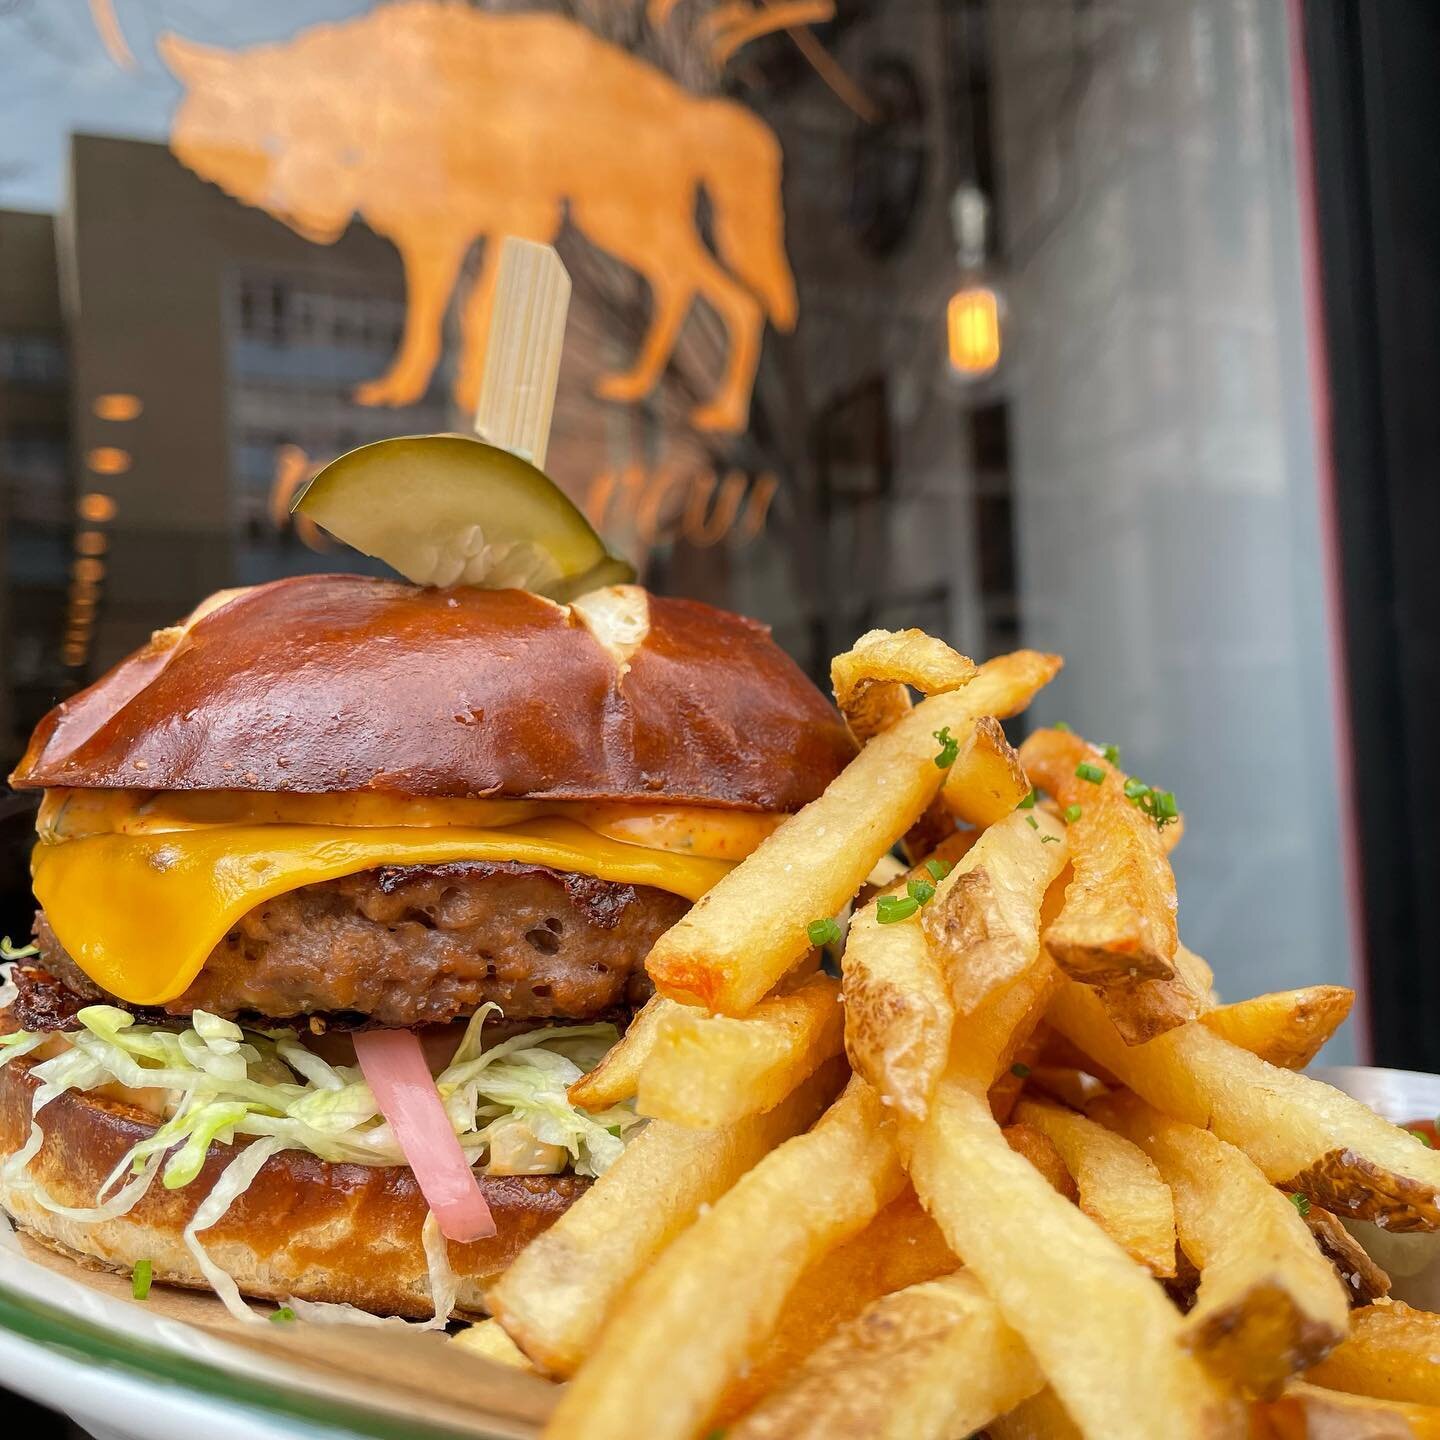 Hola!! 

Starting tomorrow join us for happy hour Tuesday - Friday 

Plant based burger with special sauce, pickled onions &amp; shredded lettuce + 1 pint of @badischestaatsbrauereirothaus 20$

All drafts + cans 1$ off 

Since Sunday - Monday our kit